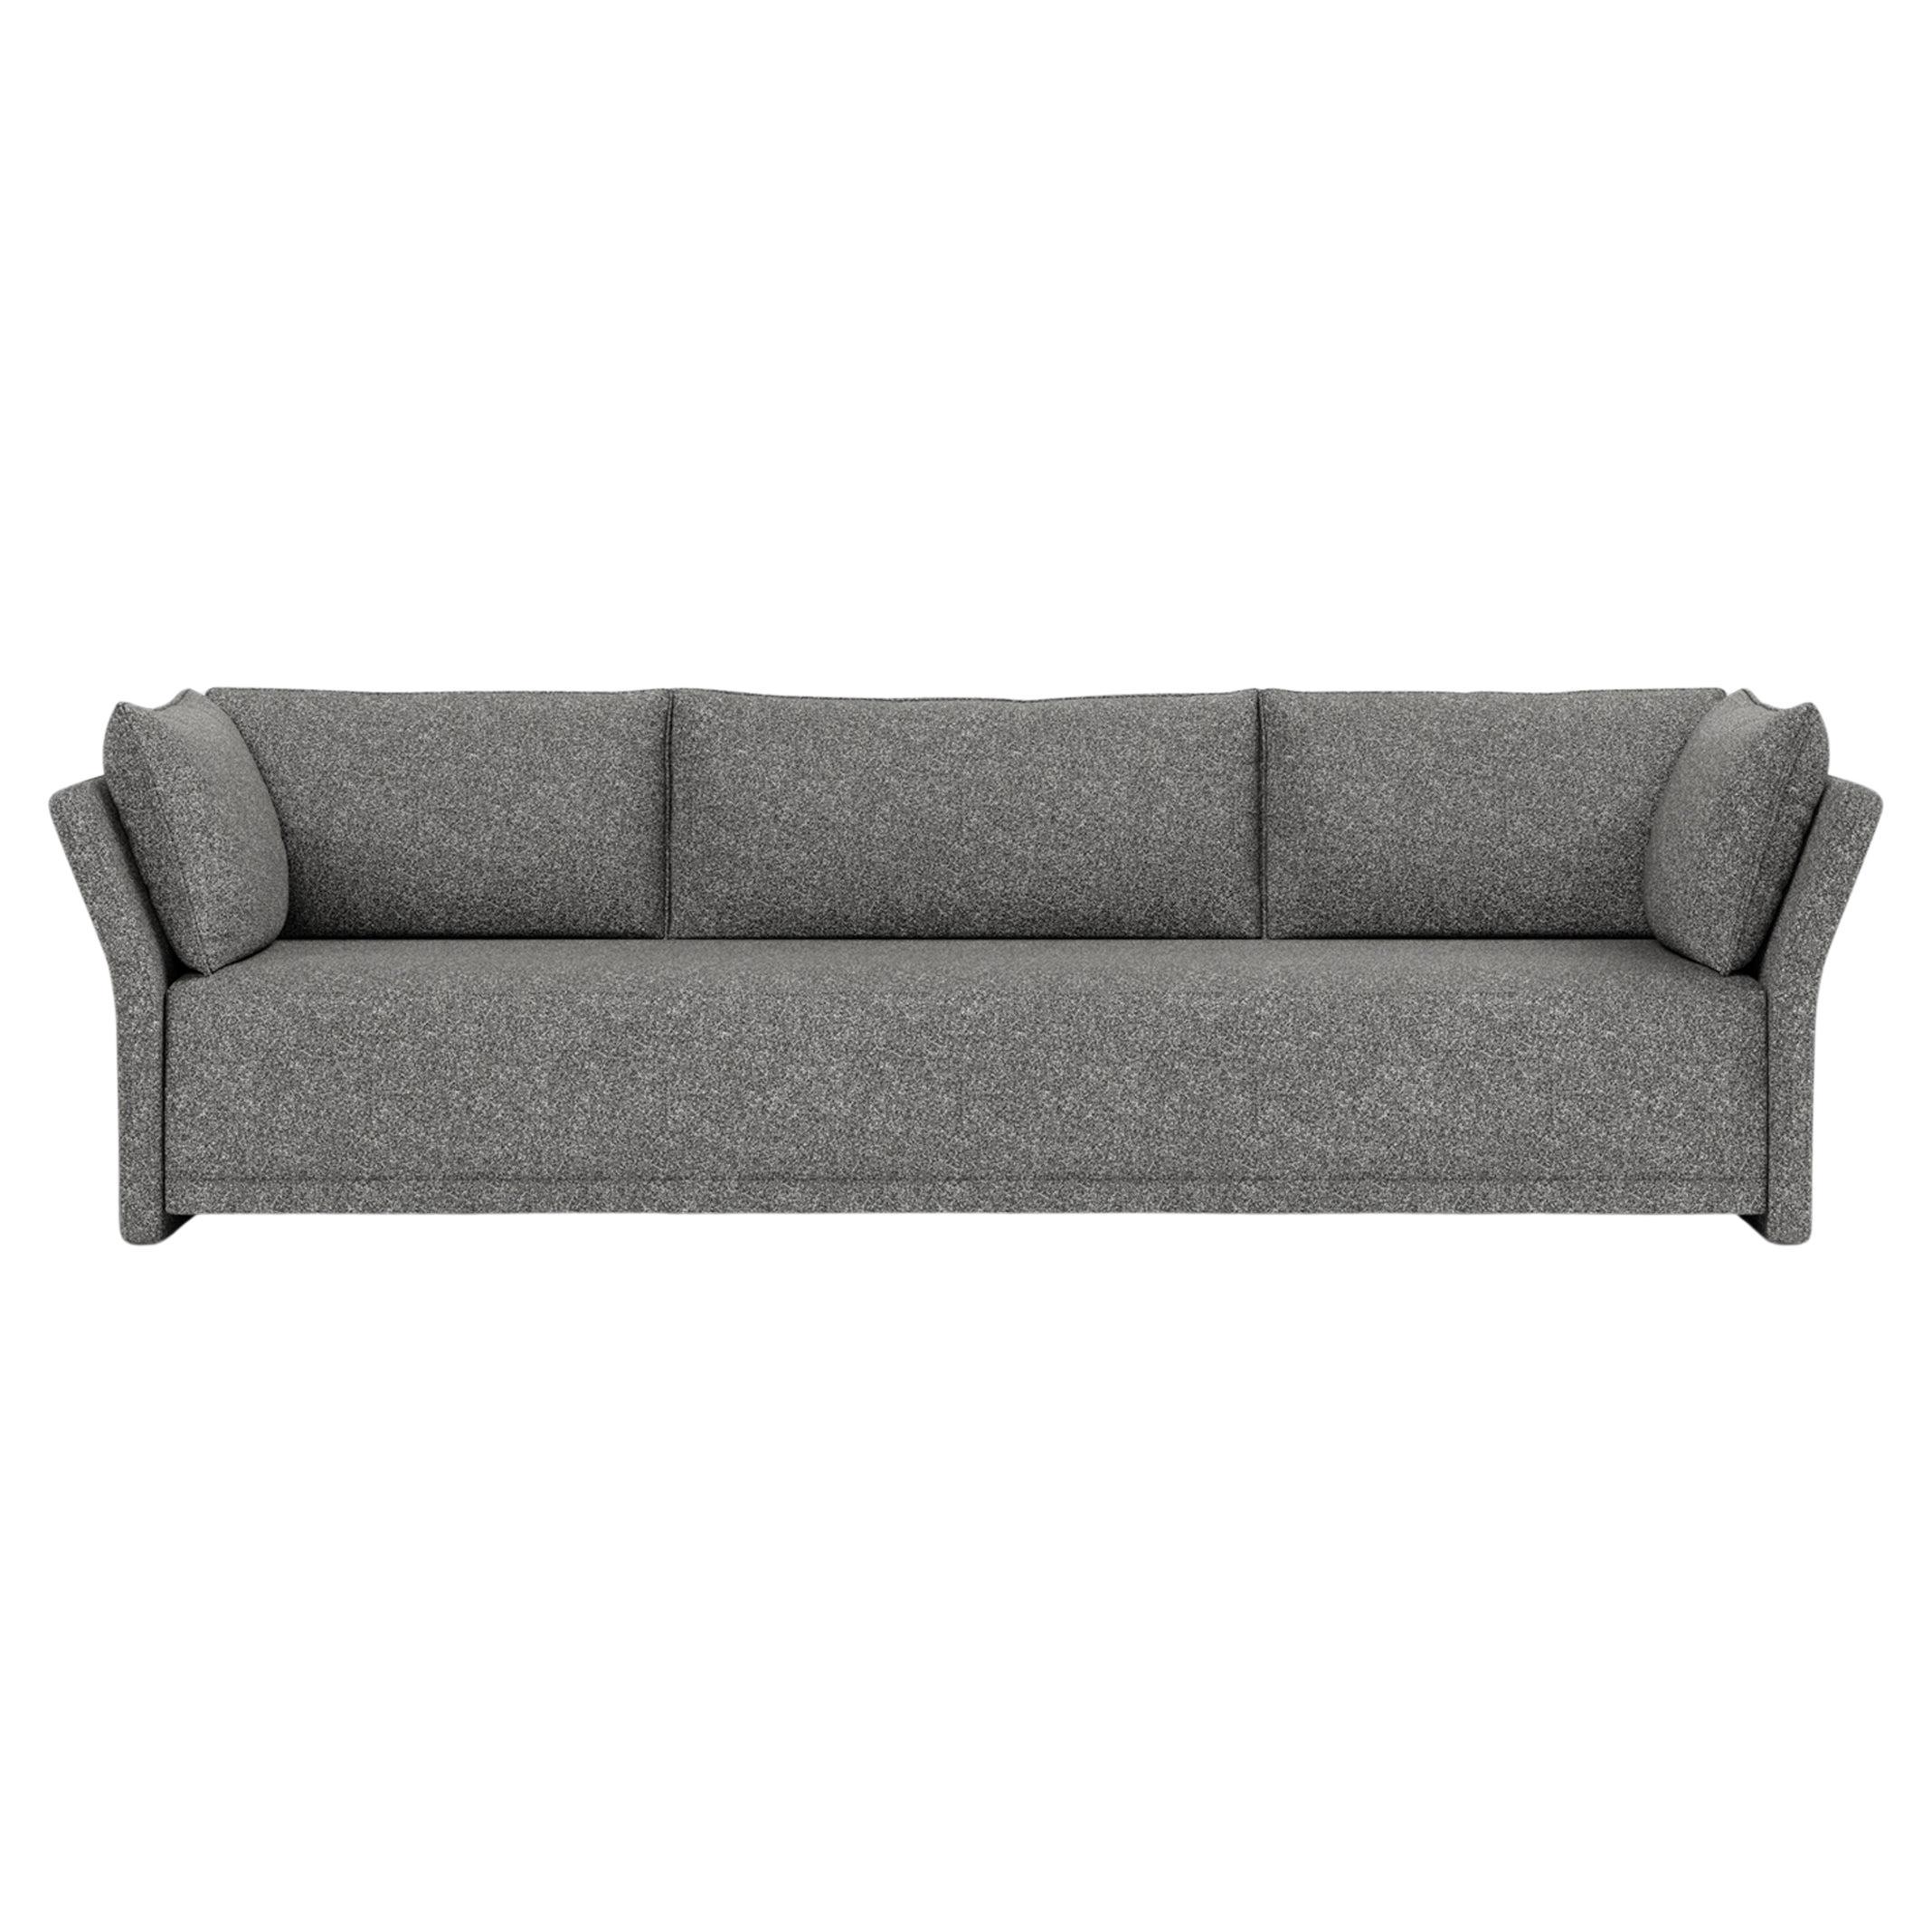 Rue de Babylone Sofa by Christophe Delcourt For Sale